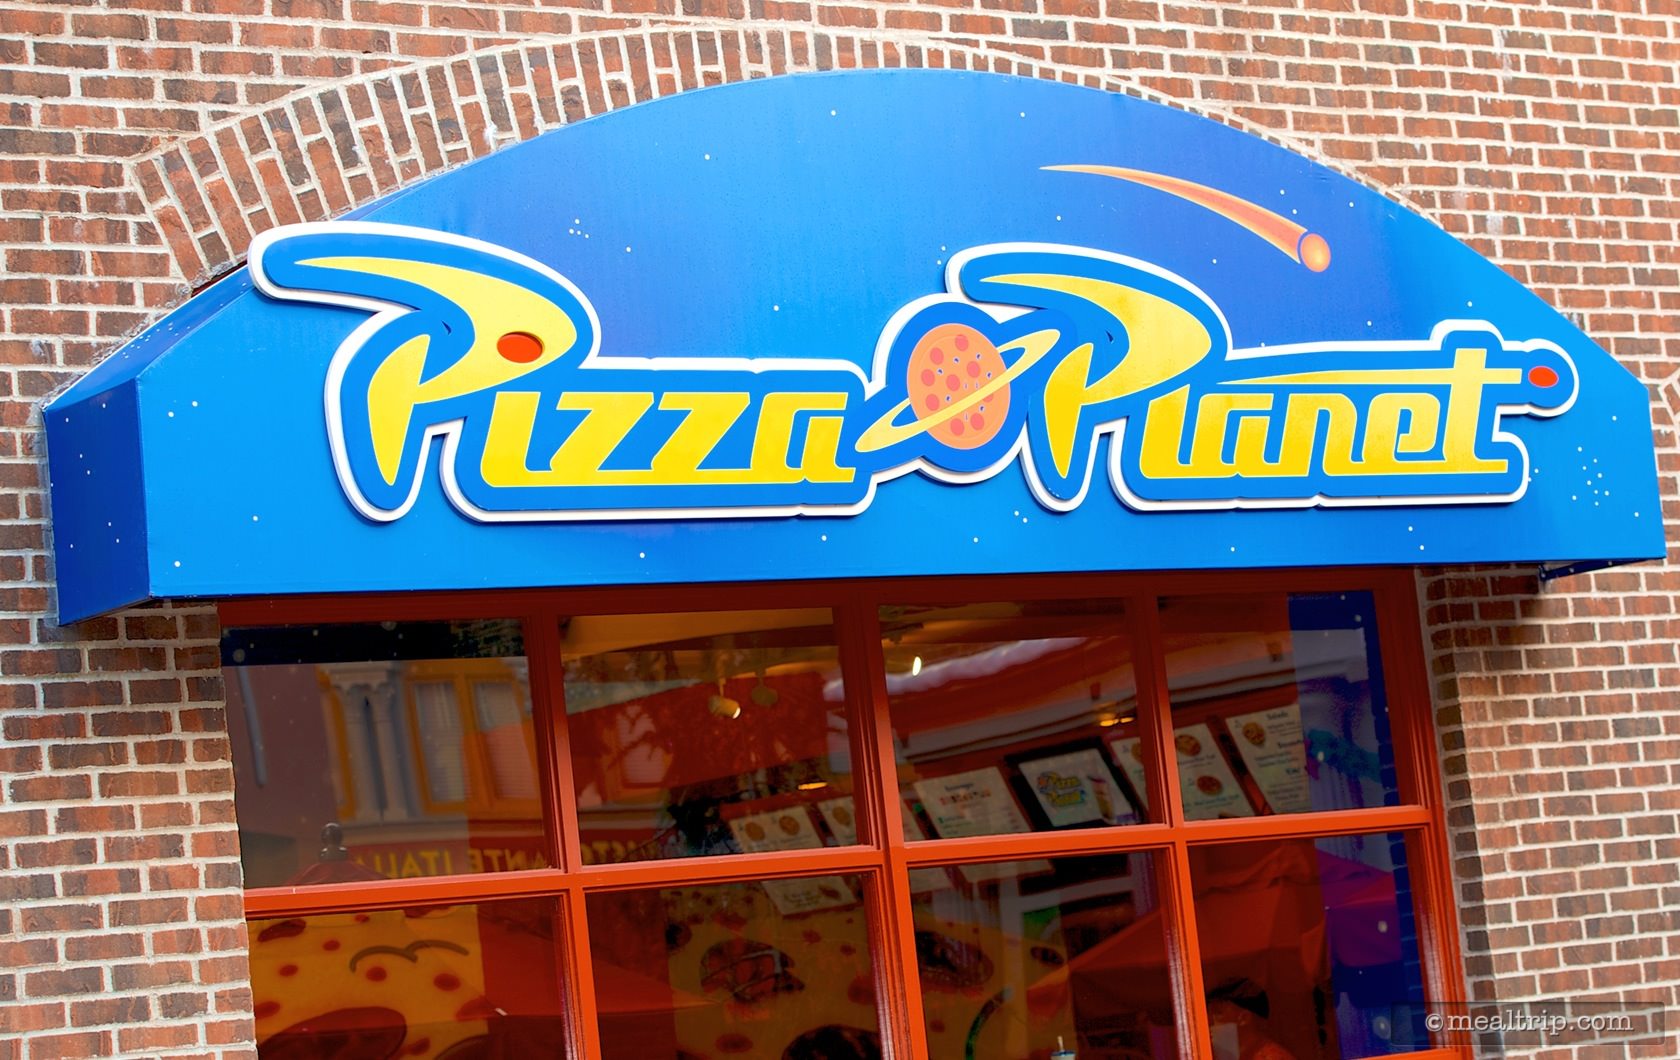 Photo Gallery for Pizza Planet Arcade at Hollywood Studios